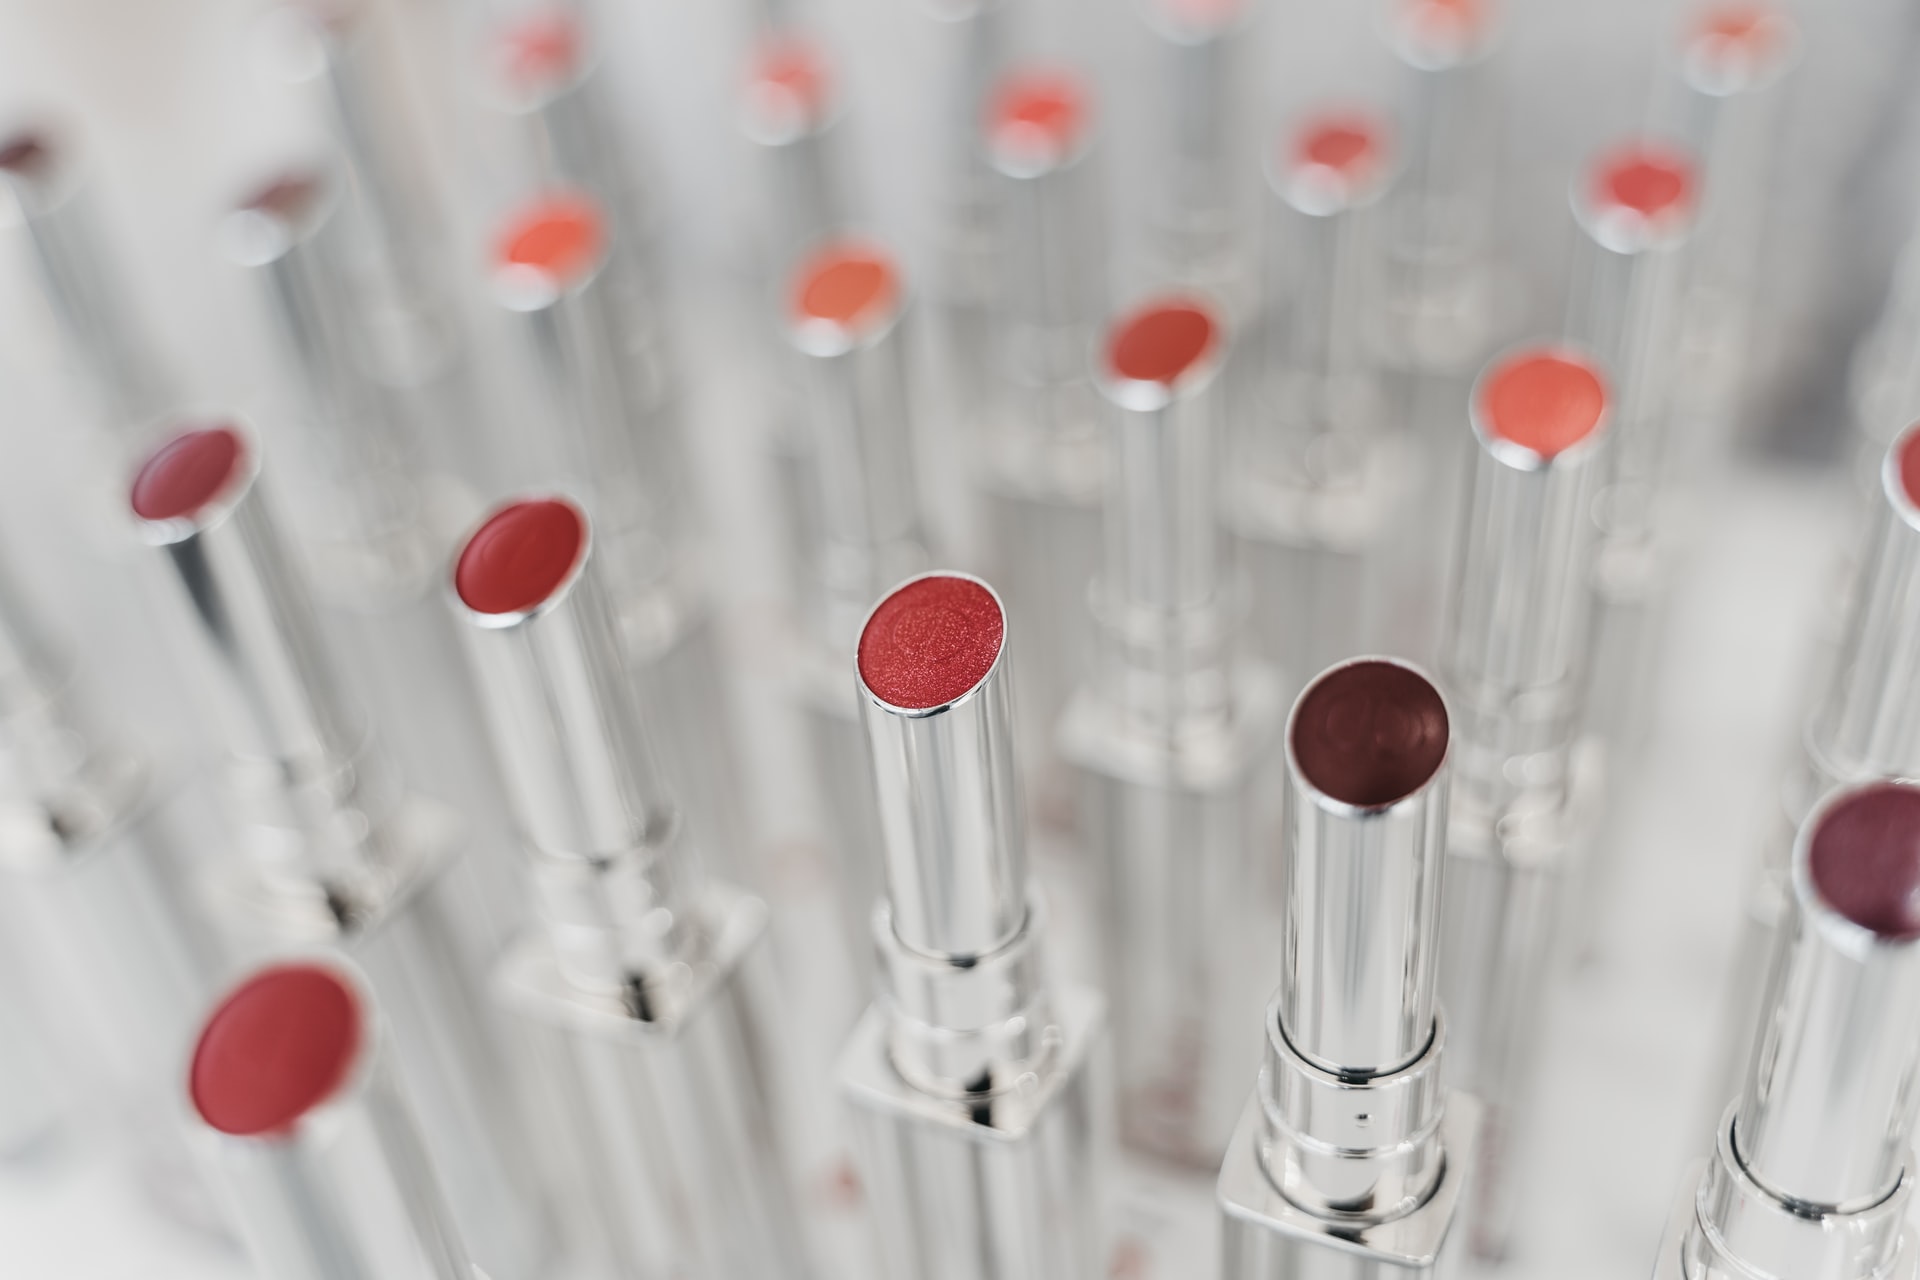 How the Cosmetics Industry Can Increase Compliance, Transparency, and Speed to Market